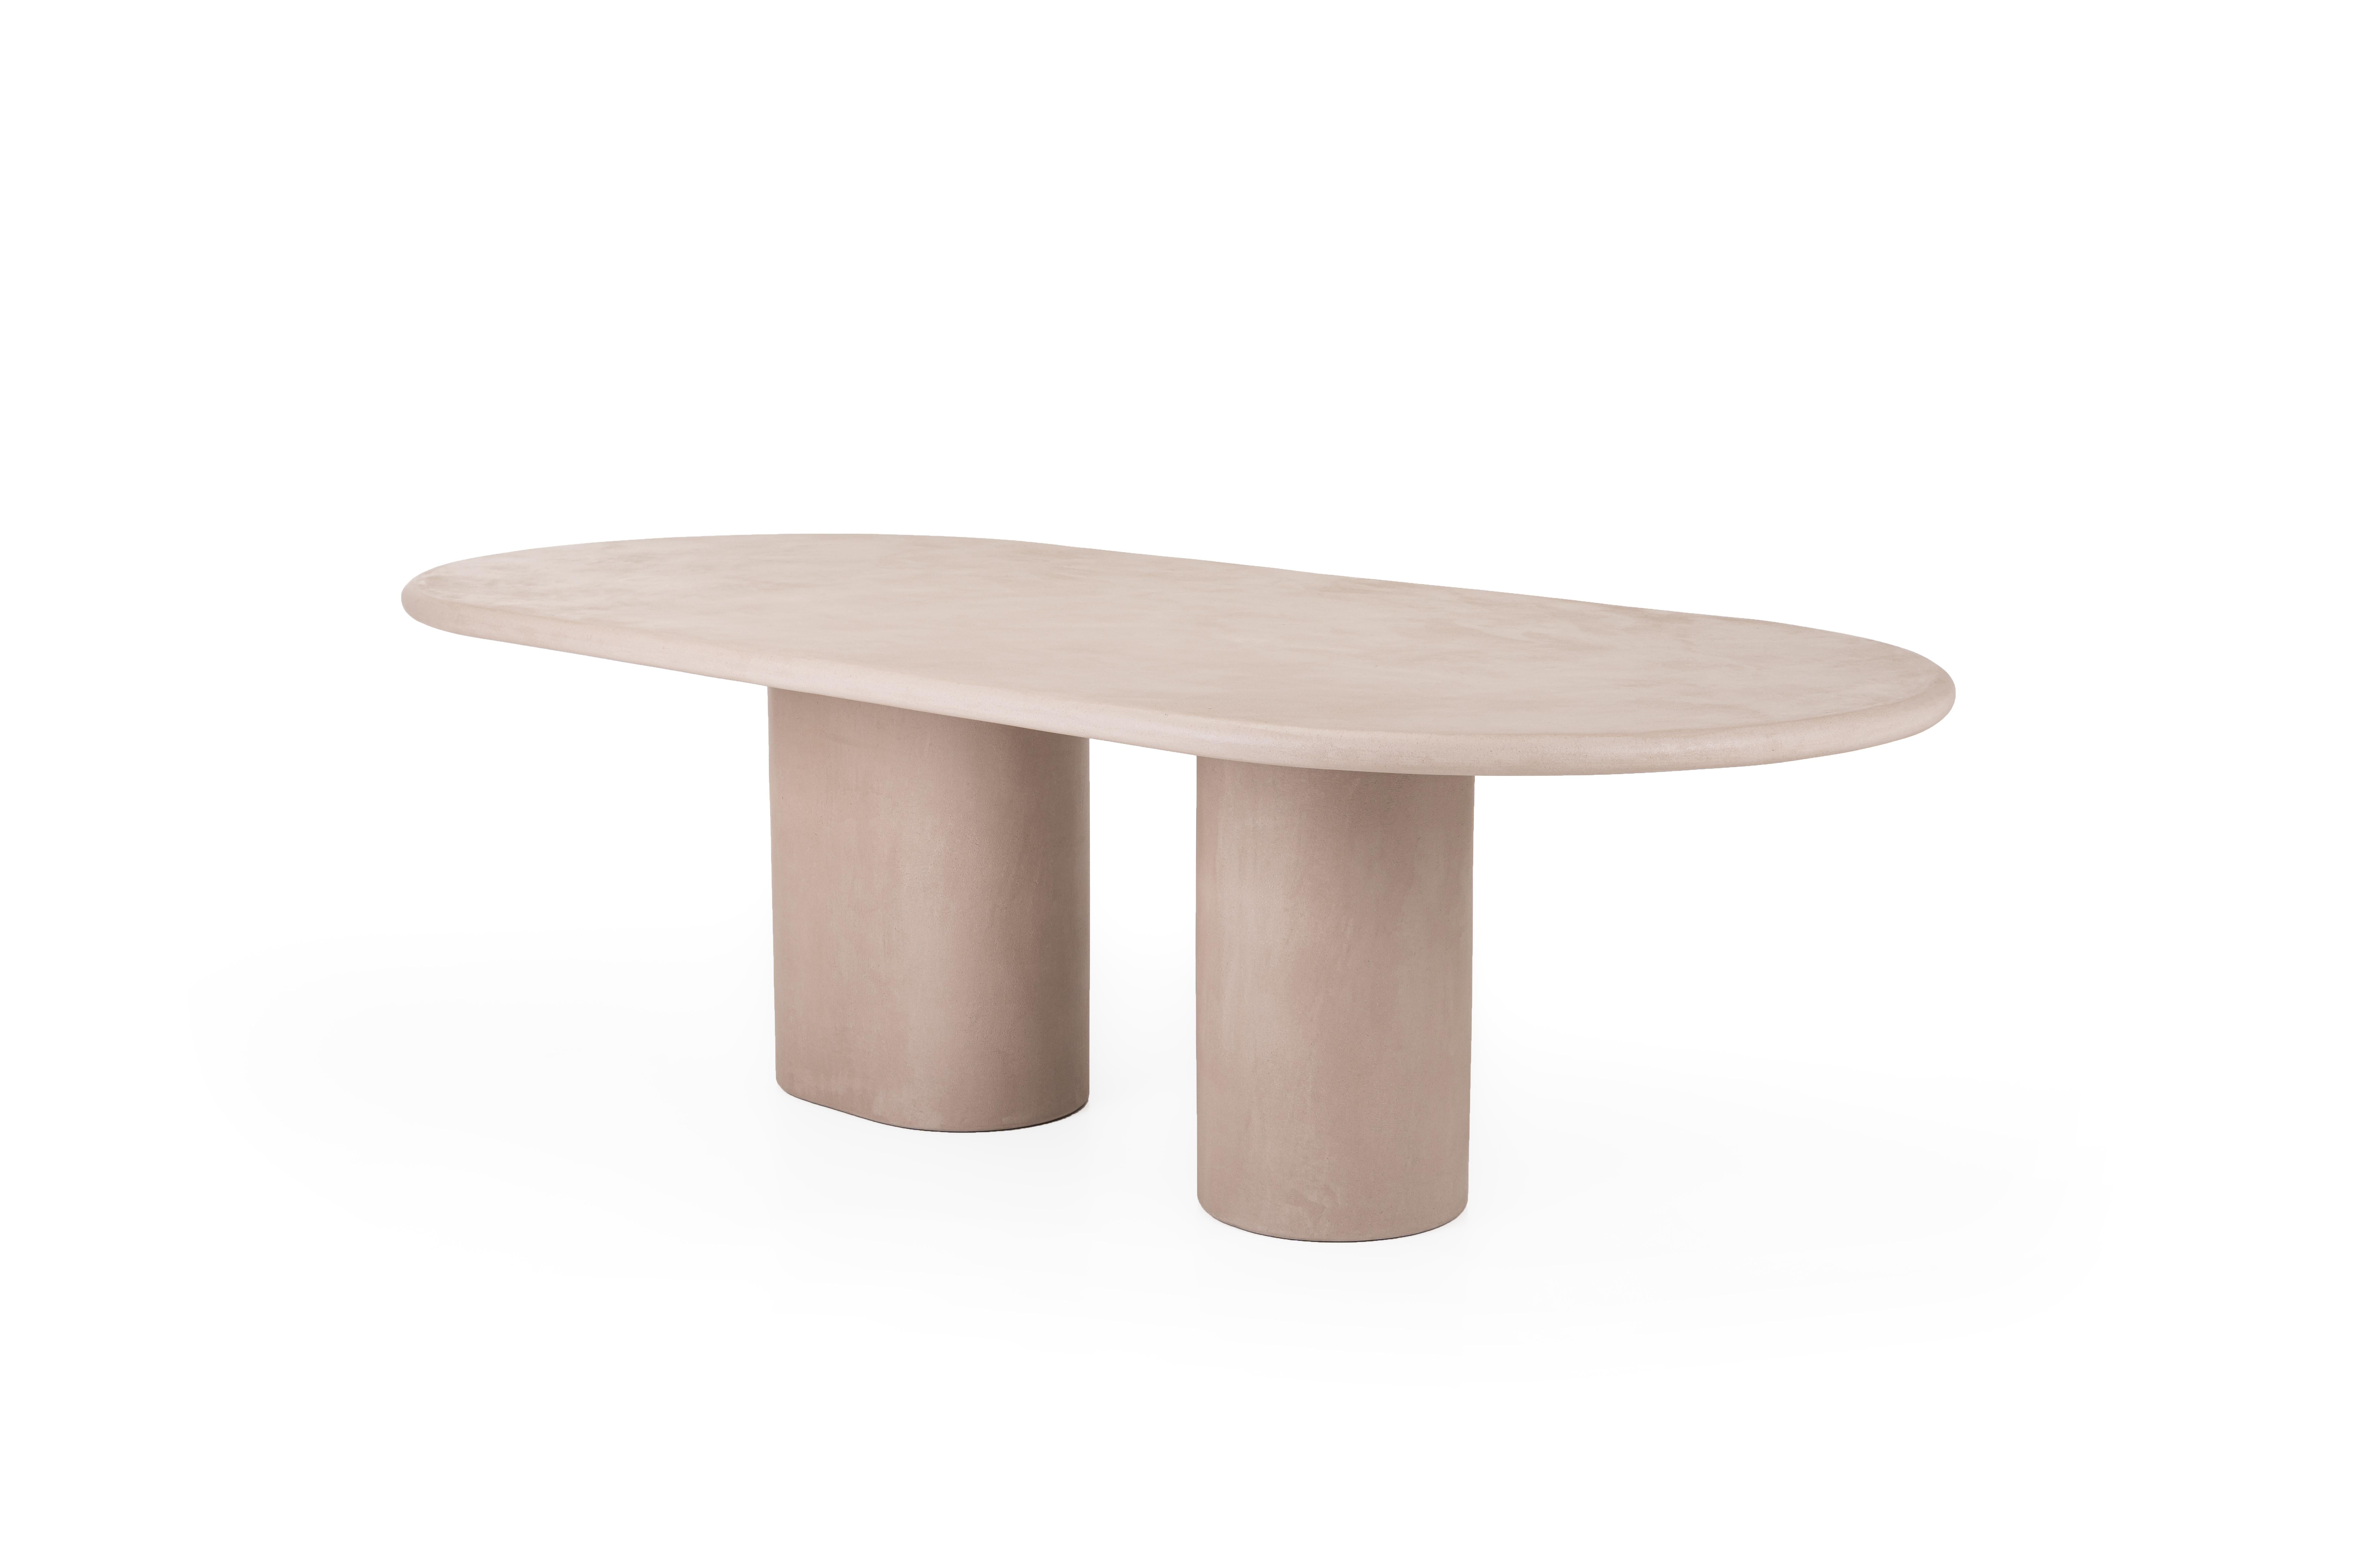 Natural Plaster Dining Table "Column" 280 by Isabelle Beaumont For Sale